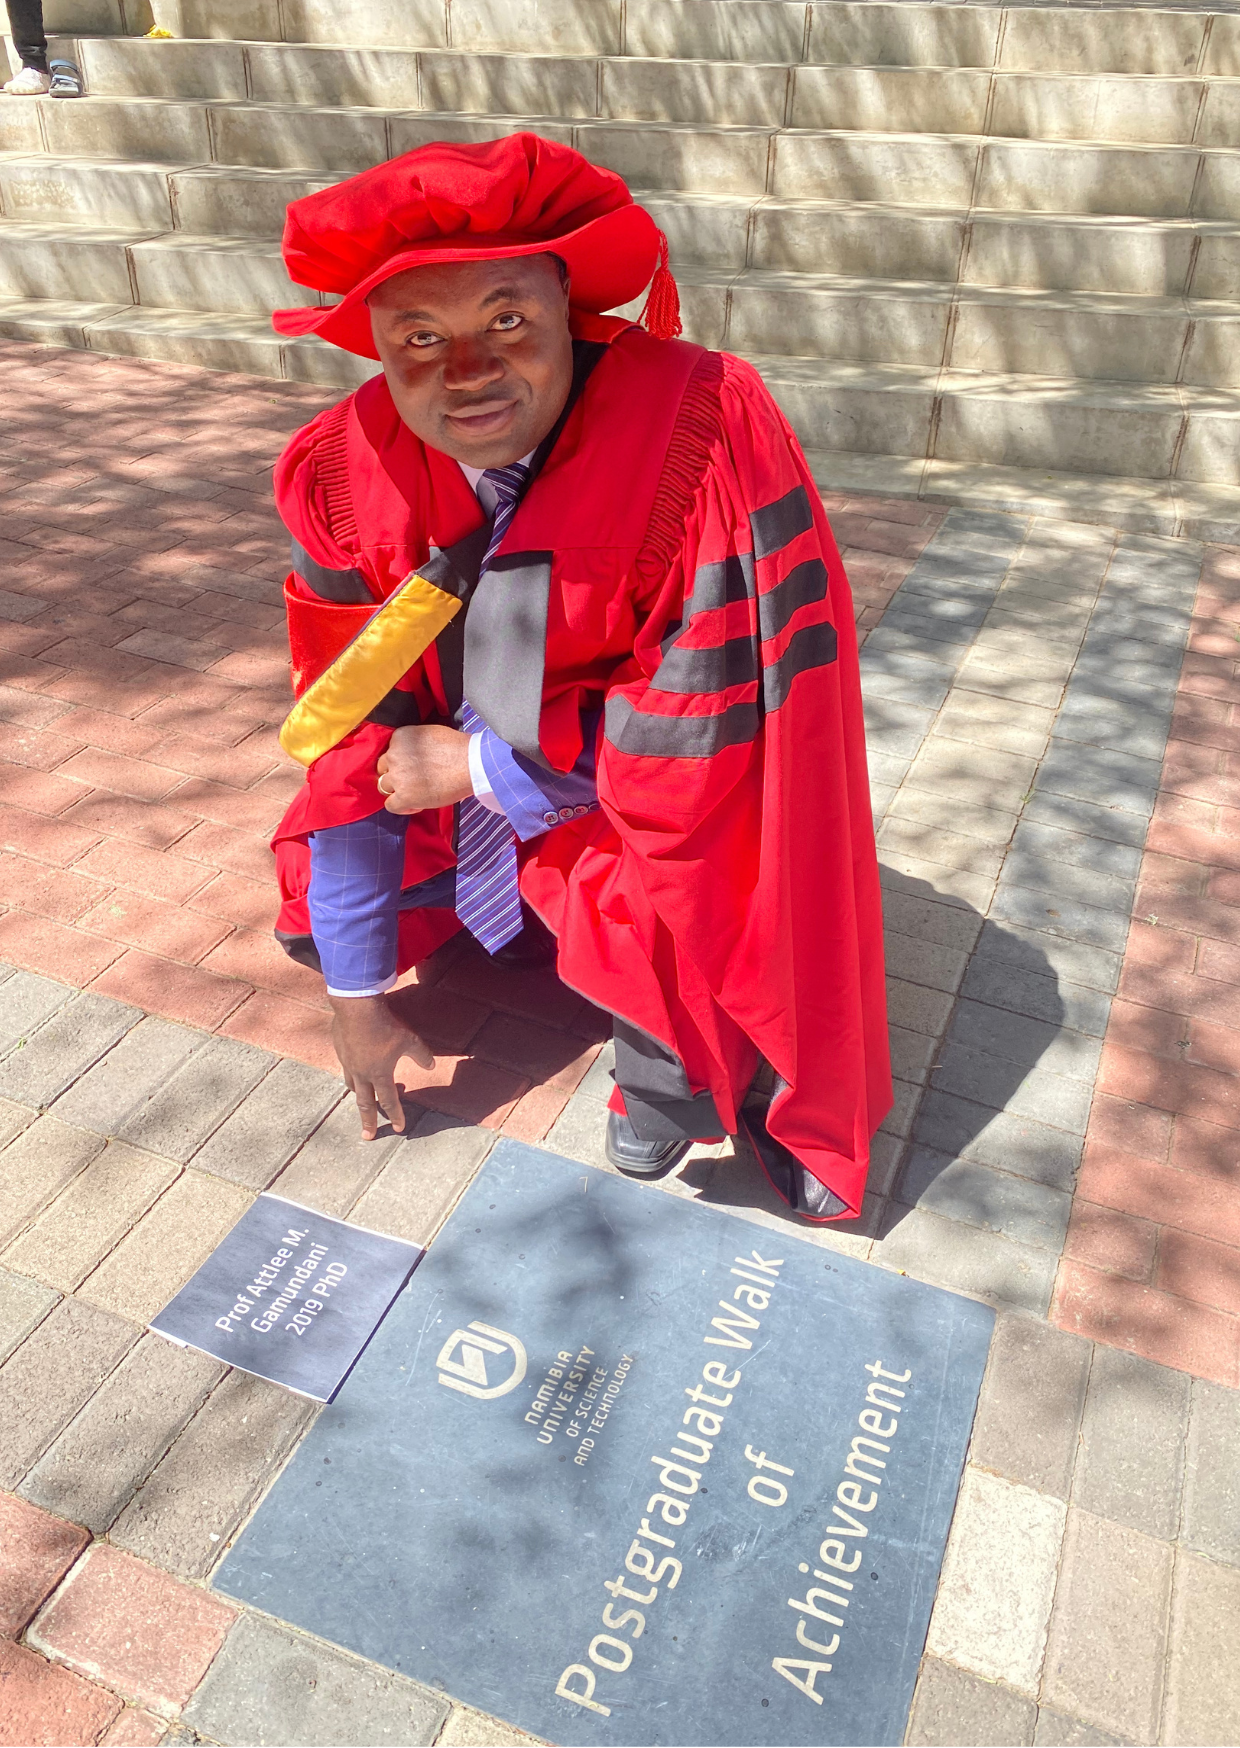 Prof Attlee Gamundani, posing at the Postgraduate Walk of Achievement site. He obtained a Doctoral qualification in Computer Science in 2019, from the Faculty of Computing and Informatics, and is amongst the first PhD graduates from the Institution.  